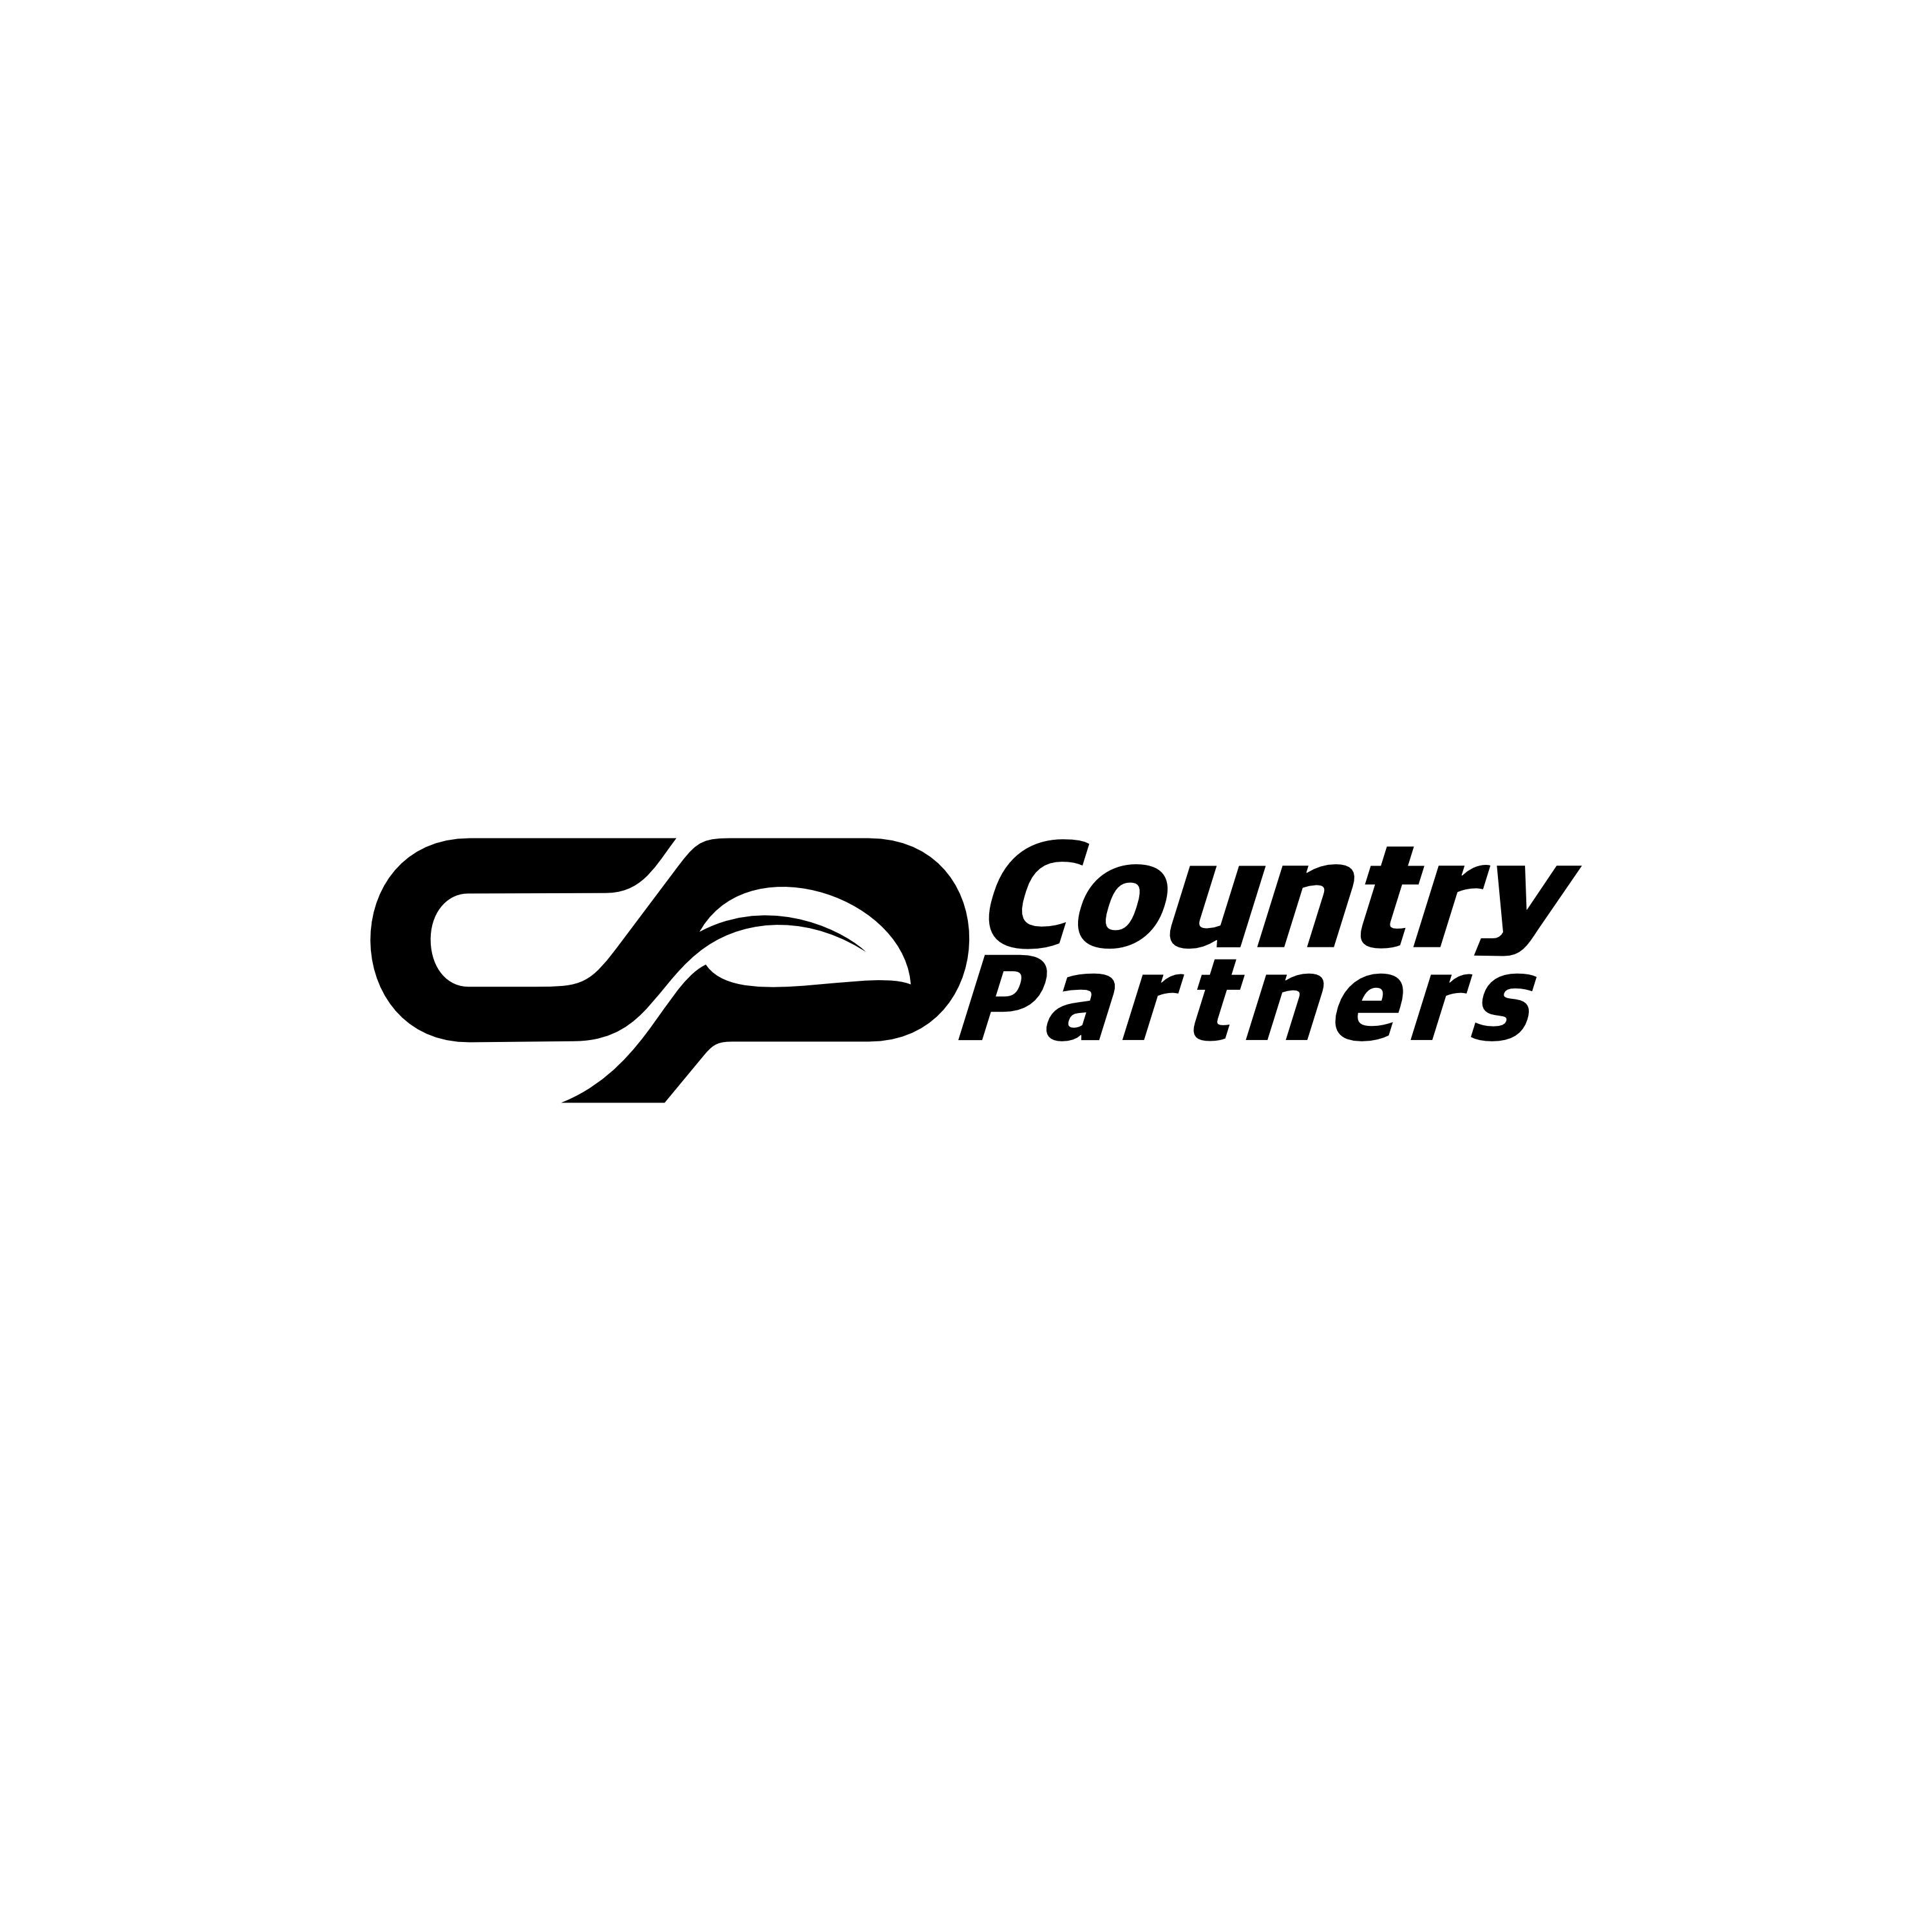 Country Partners Cooperative